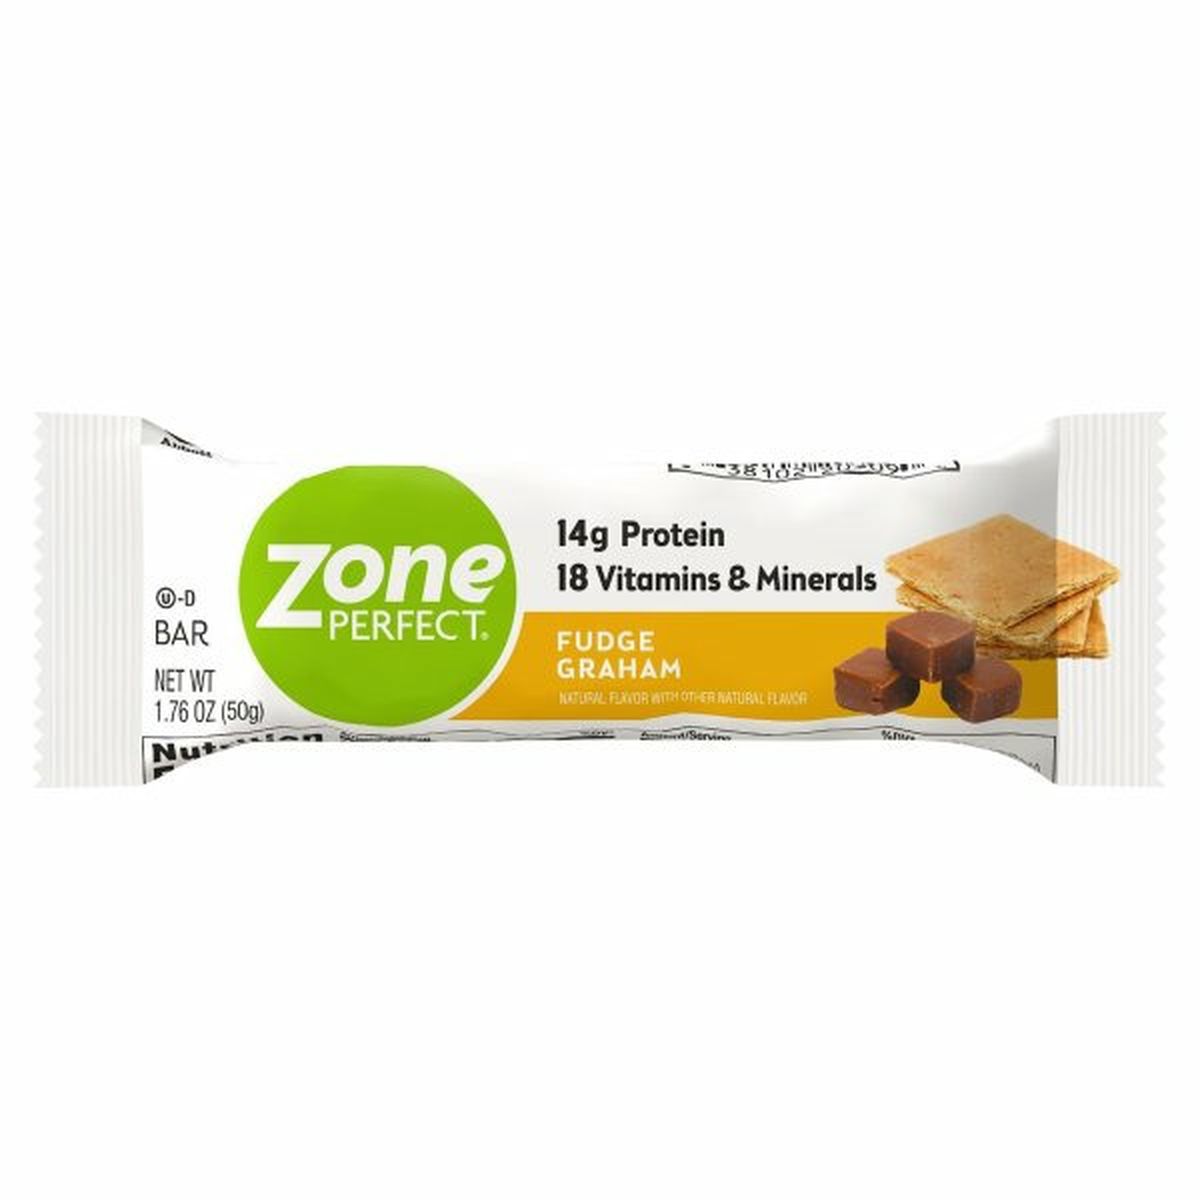 Calories in ZonePerfect Nutrition Bar, Fudge Graham